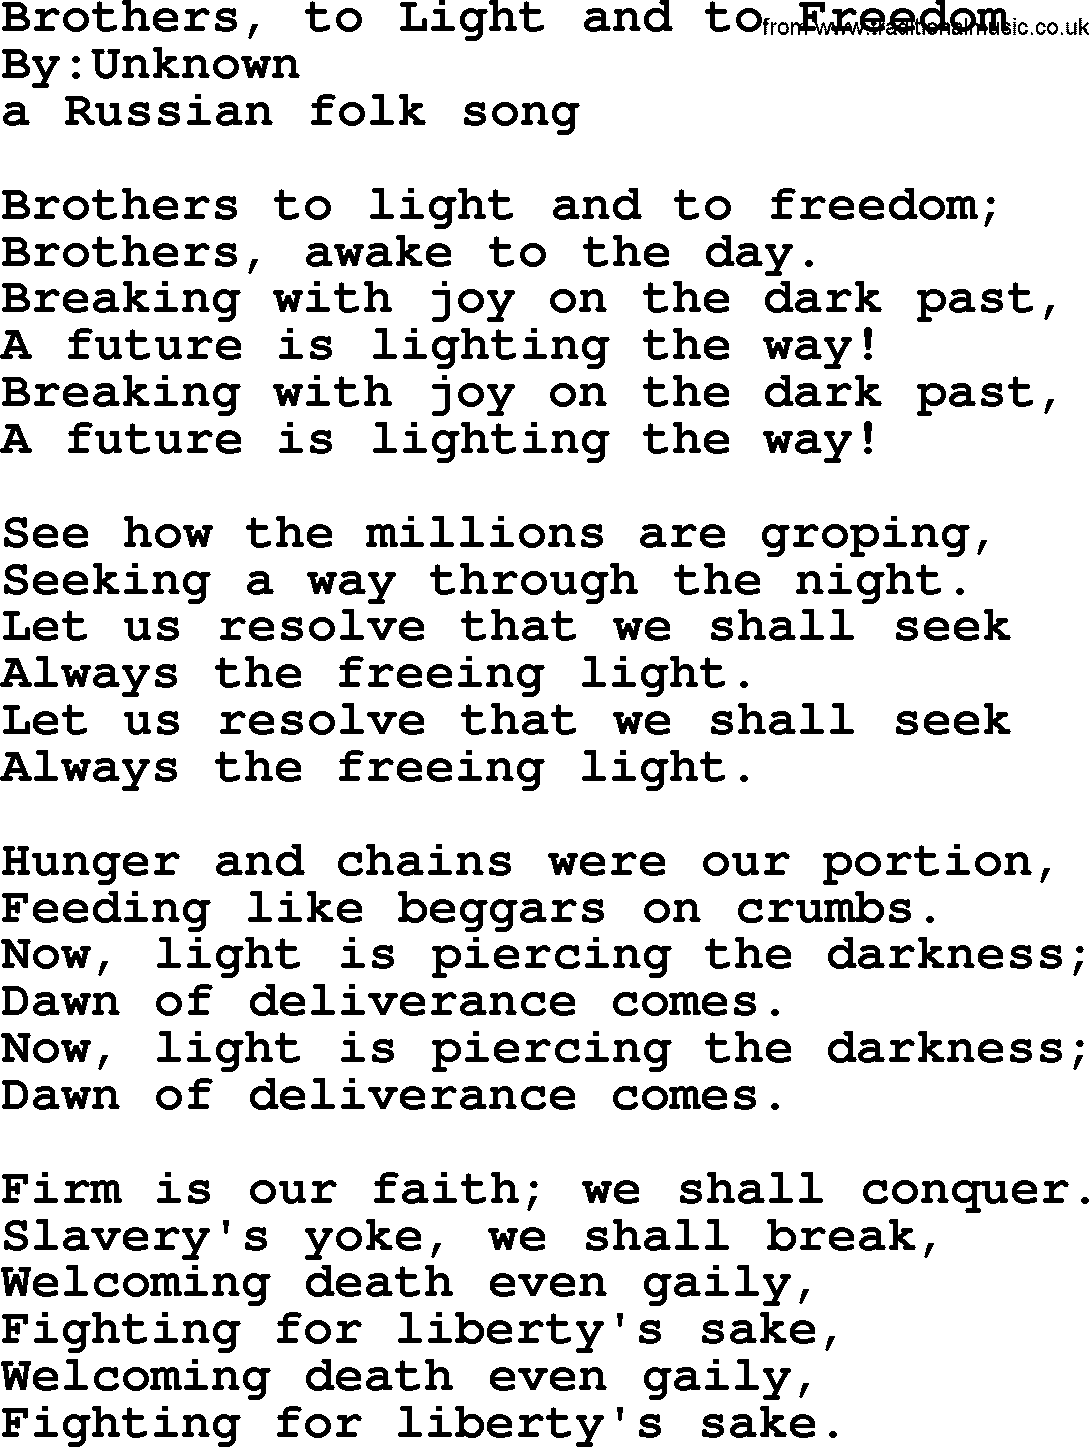 Political, Solidarity, Workers or Union song: Brothers To Light And To Freedom, lyrics